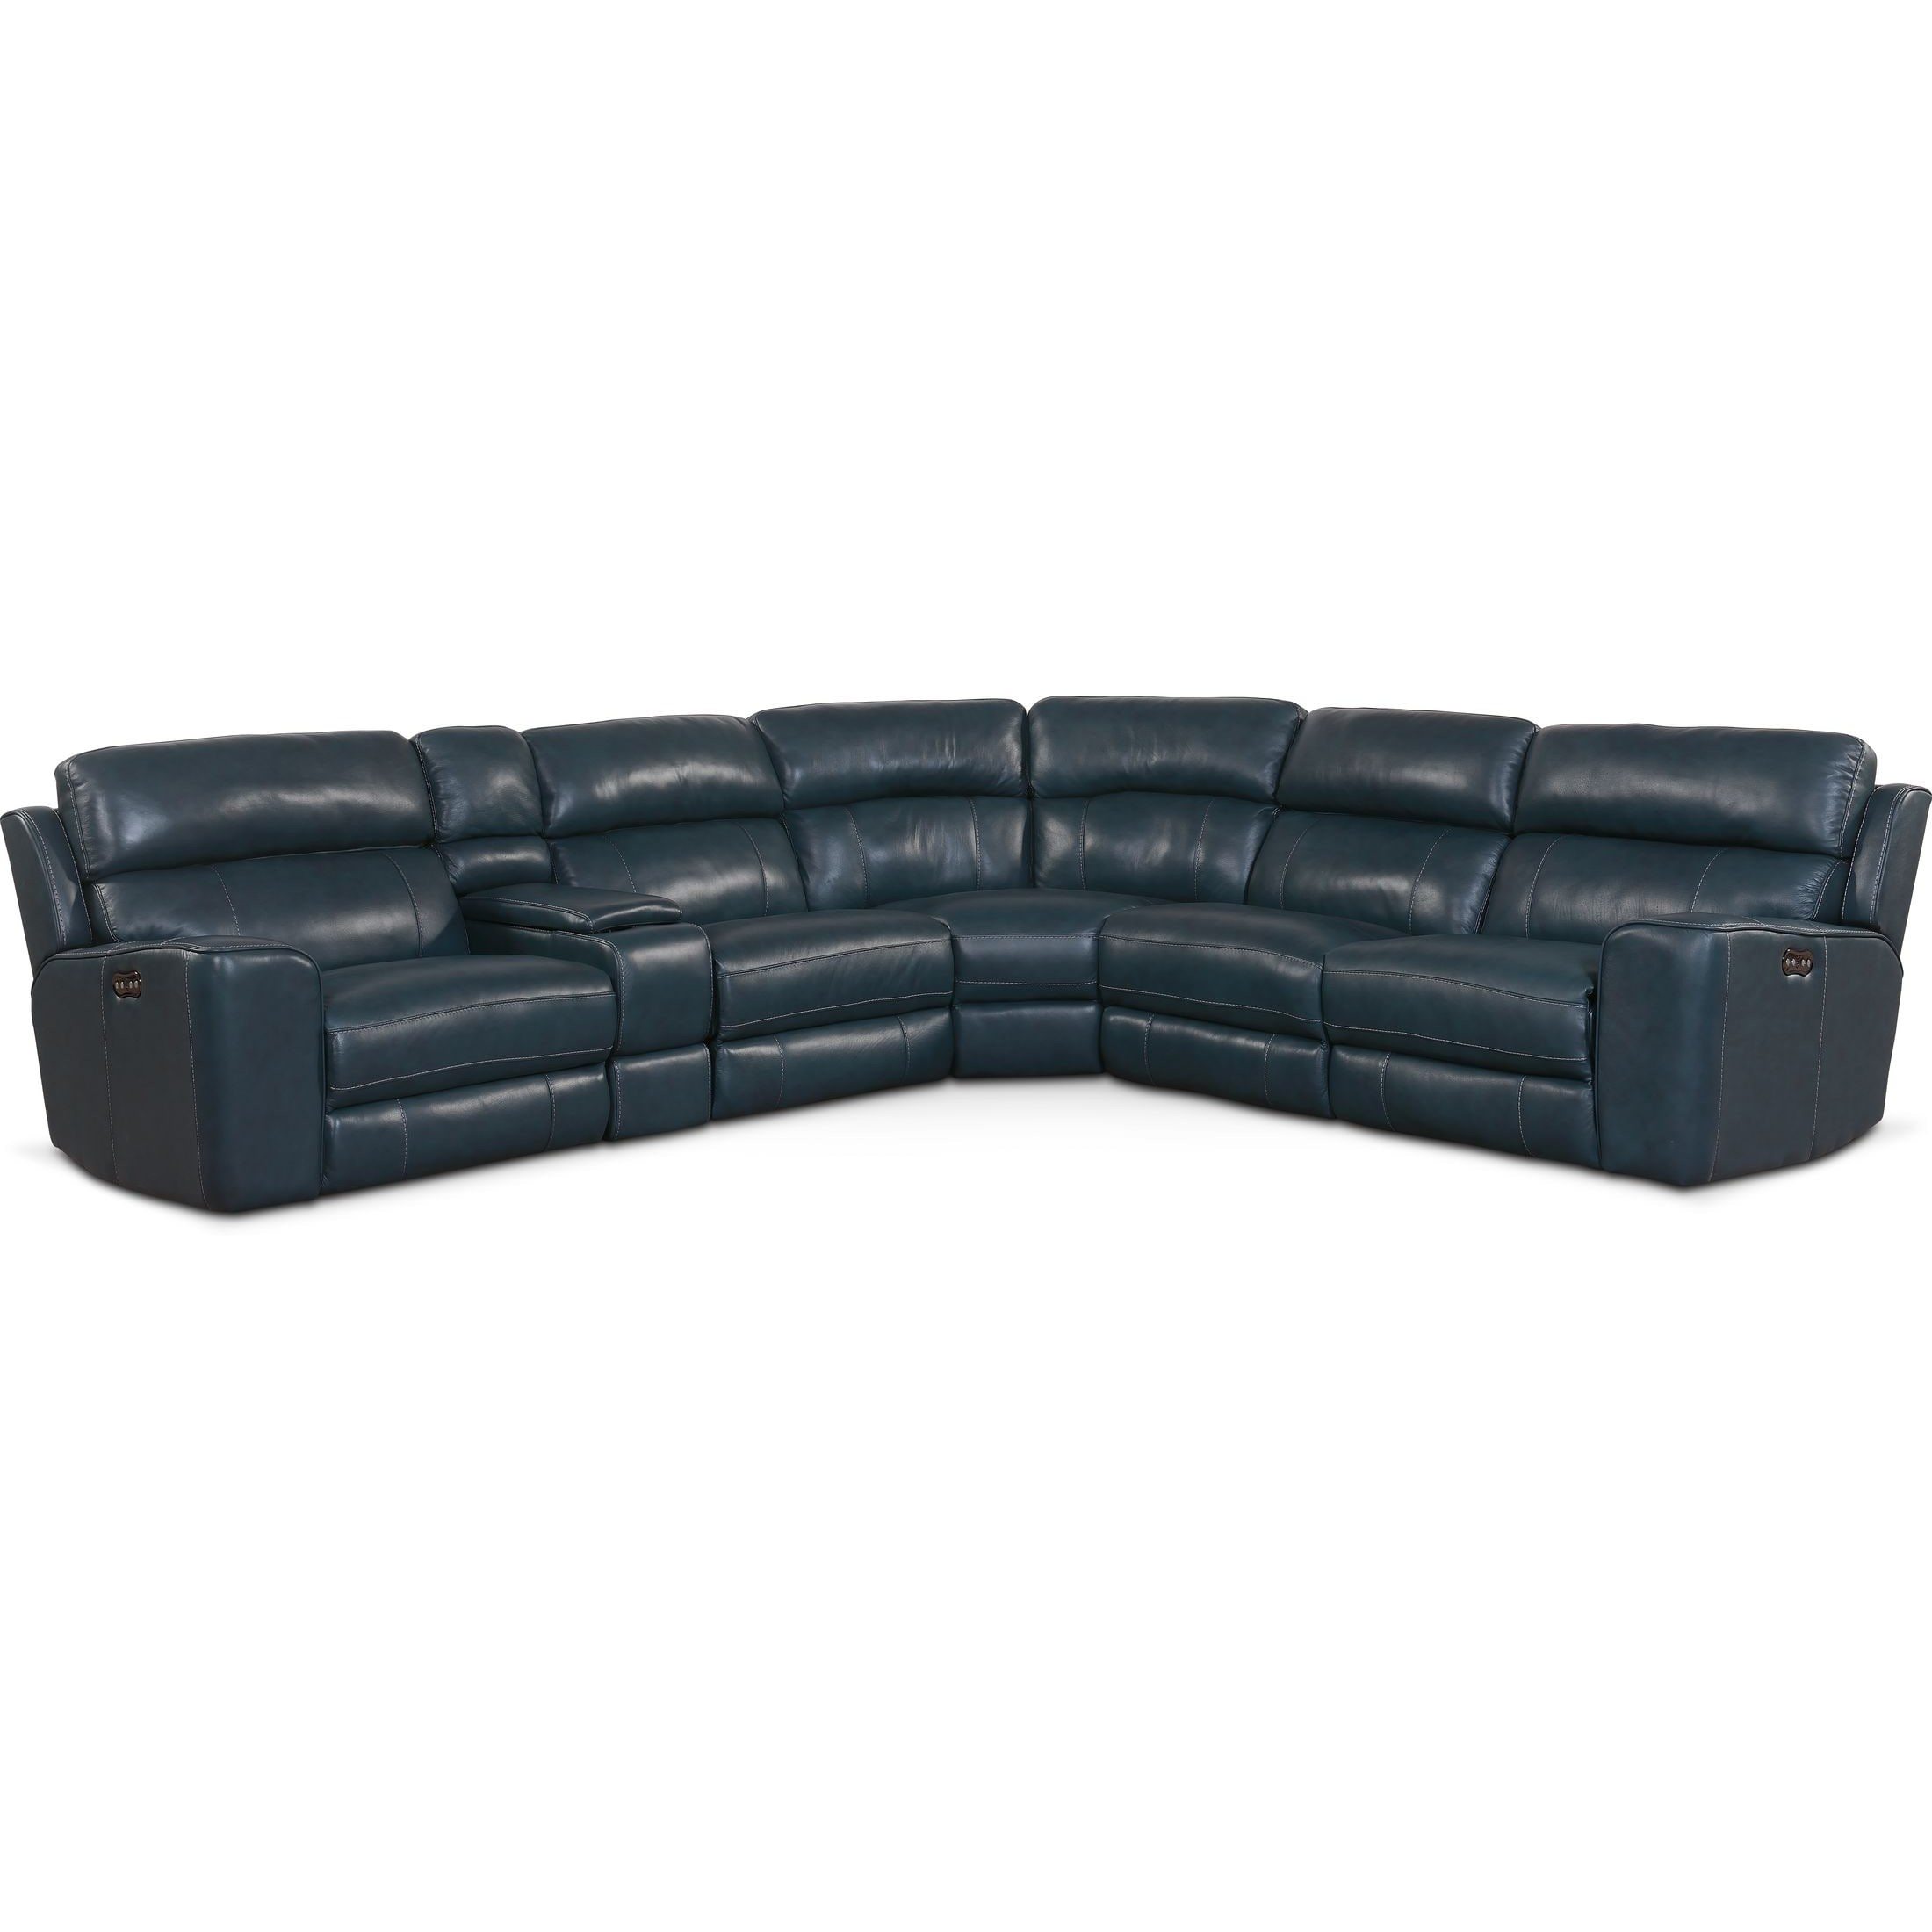 Newport 6-Piece Dual-Power Reclining Sectional with 3 Reclining Seats